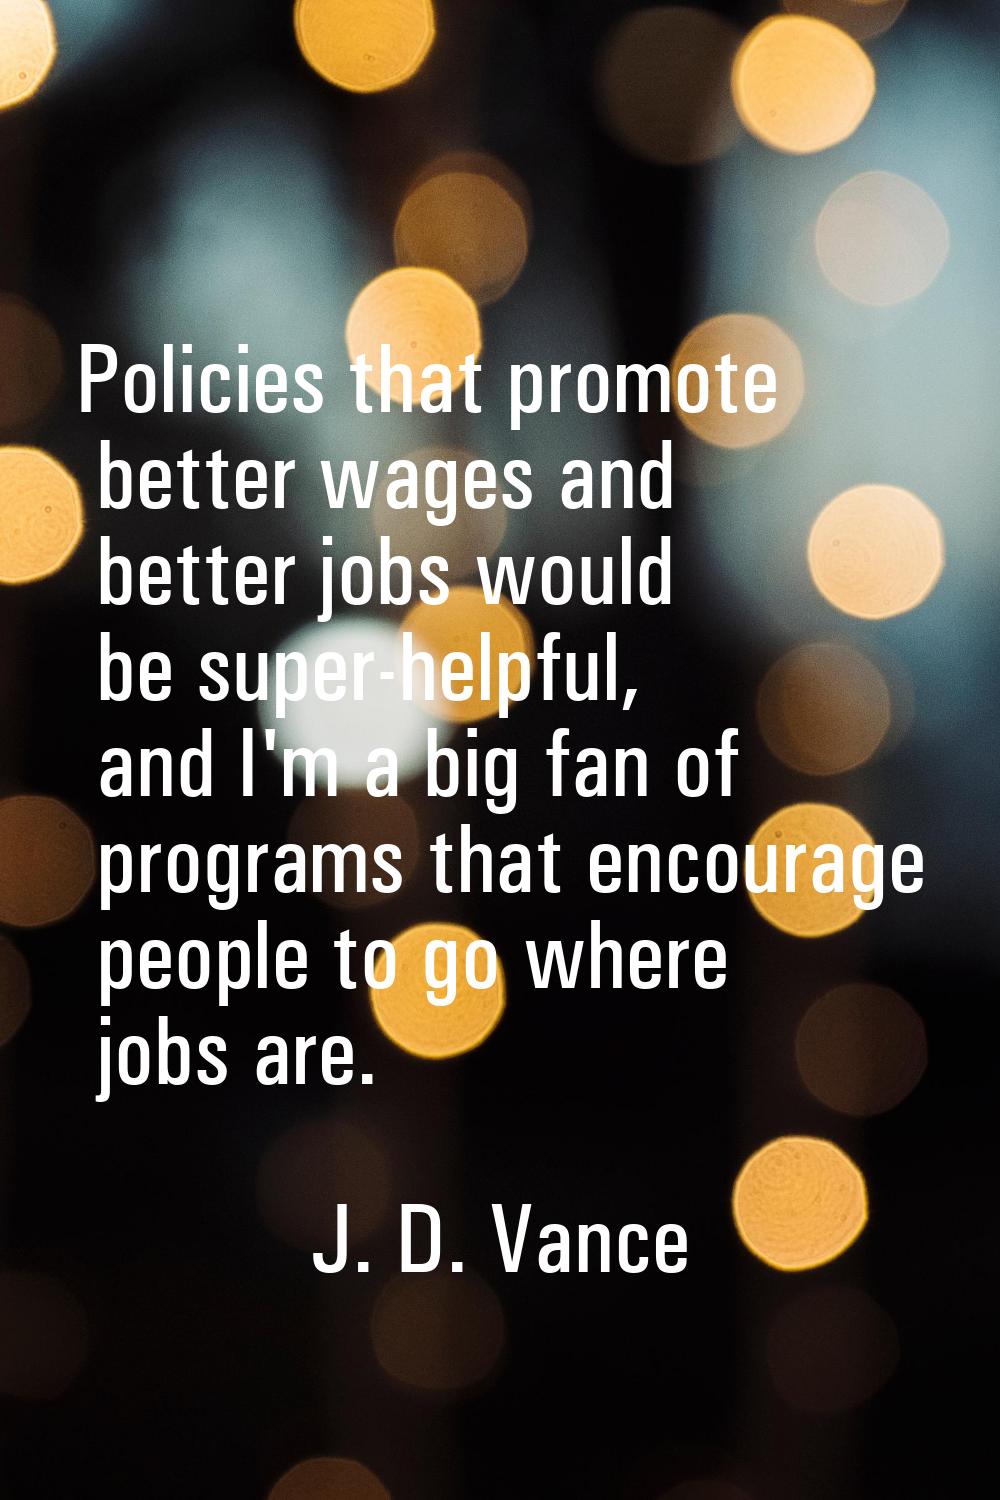 Policies that promote better wages and better jobs would be super-helpful, and I'm a big fan of pro